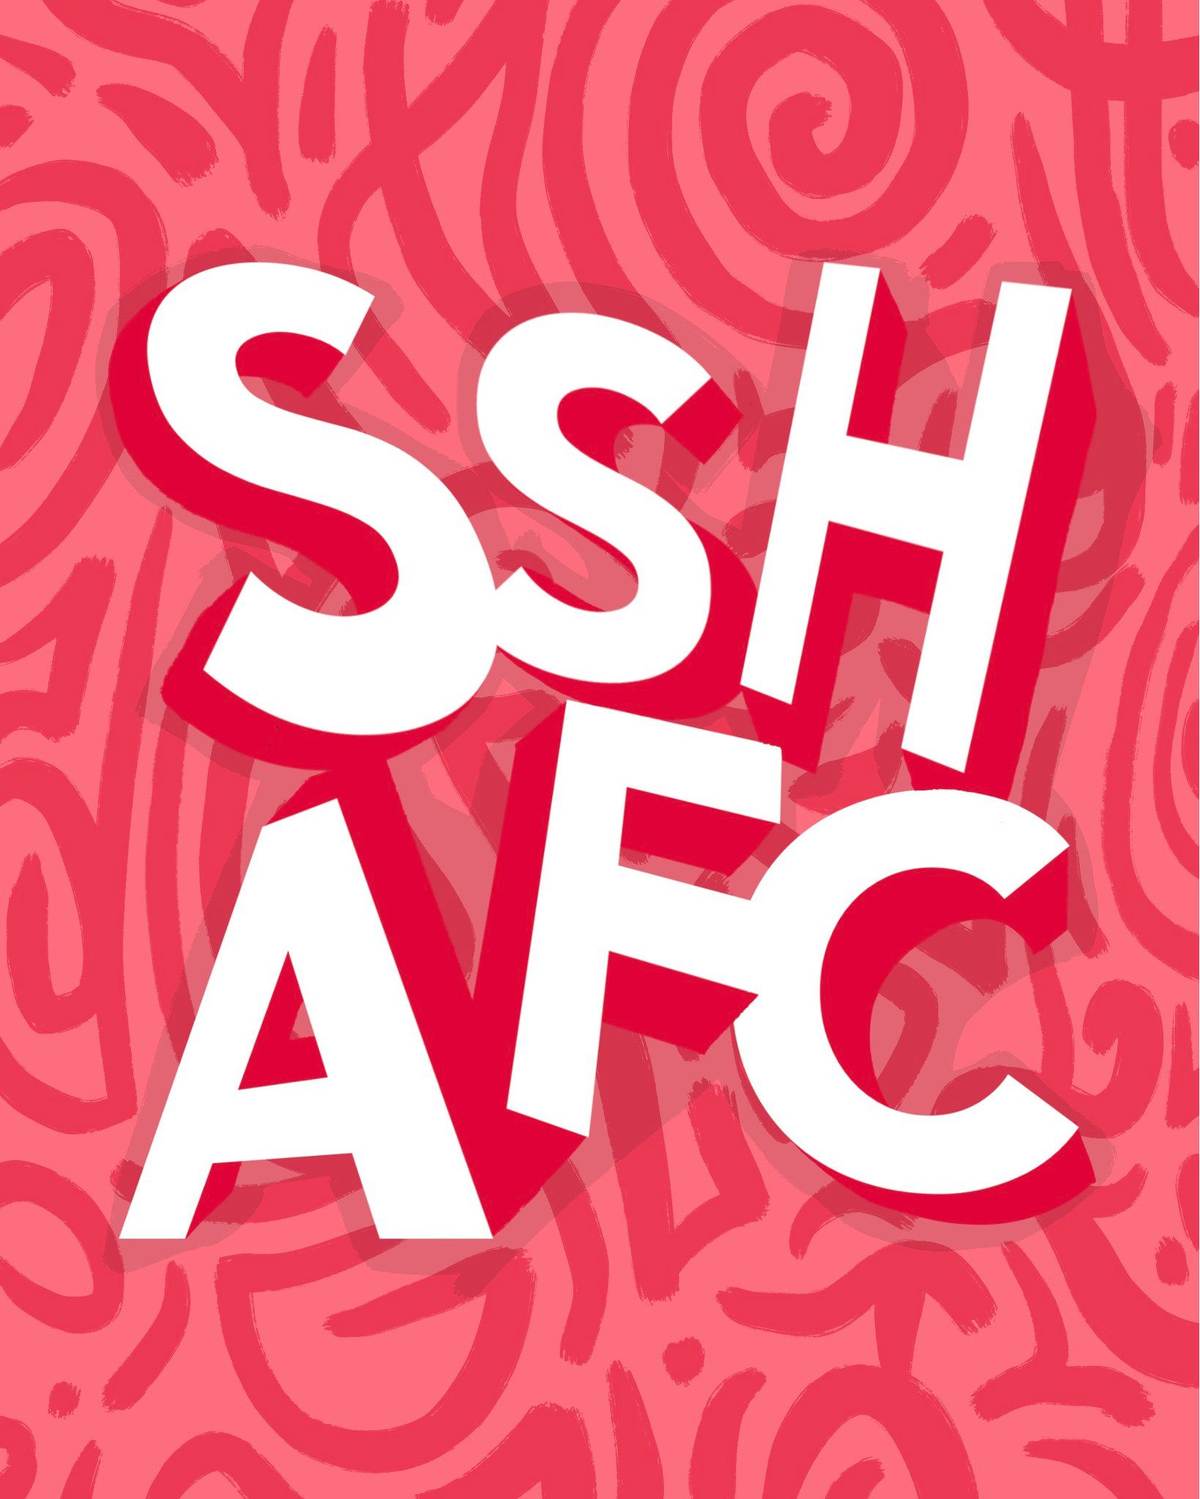 SSHAFC Graphic with new away kit pink colors